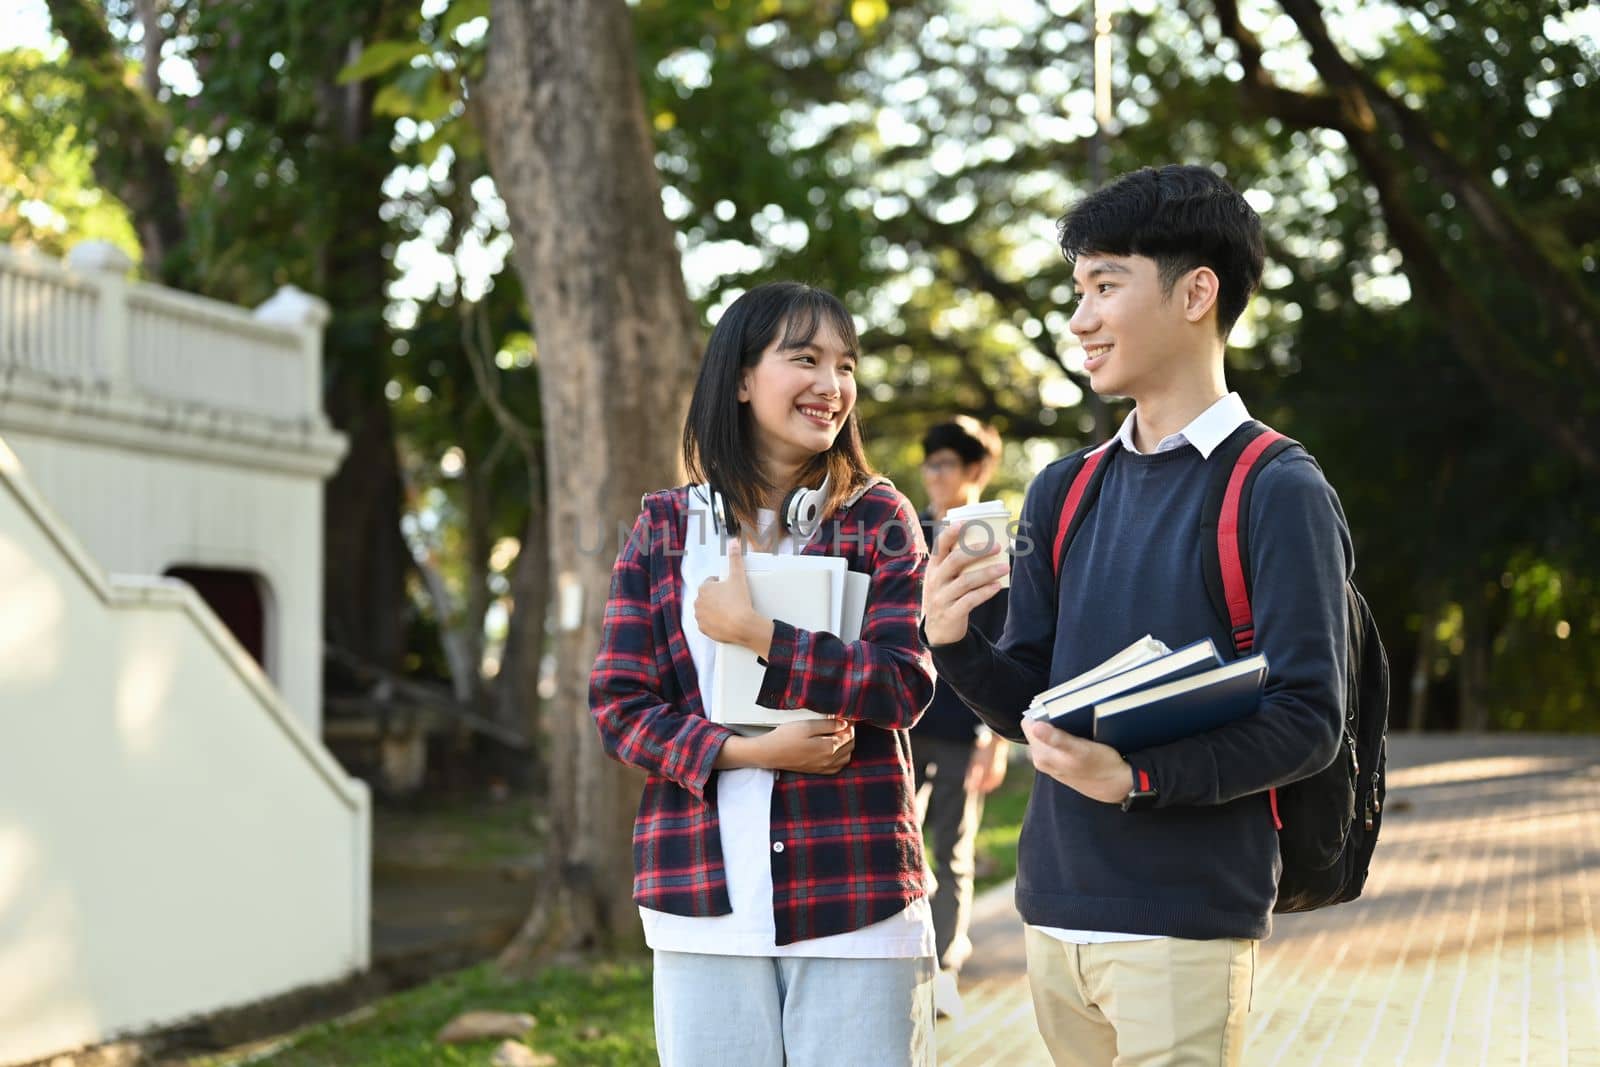 Two friendly university students are talking to each other after classes while walking in university campus outdoors.